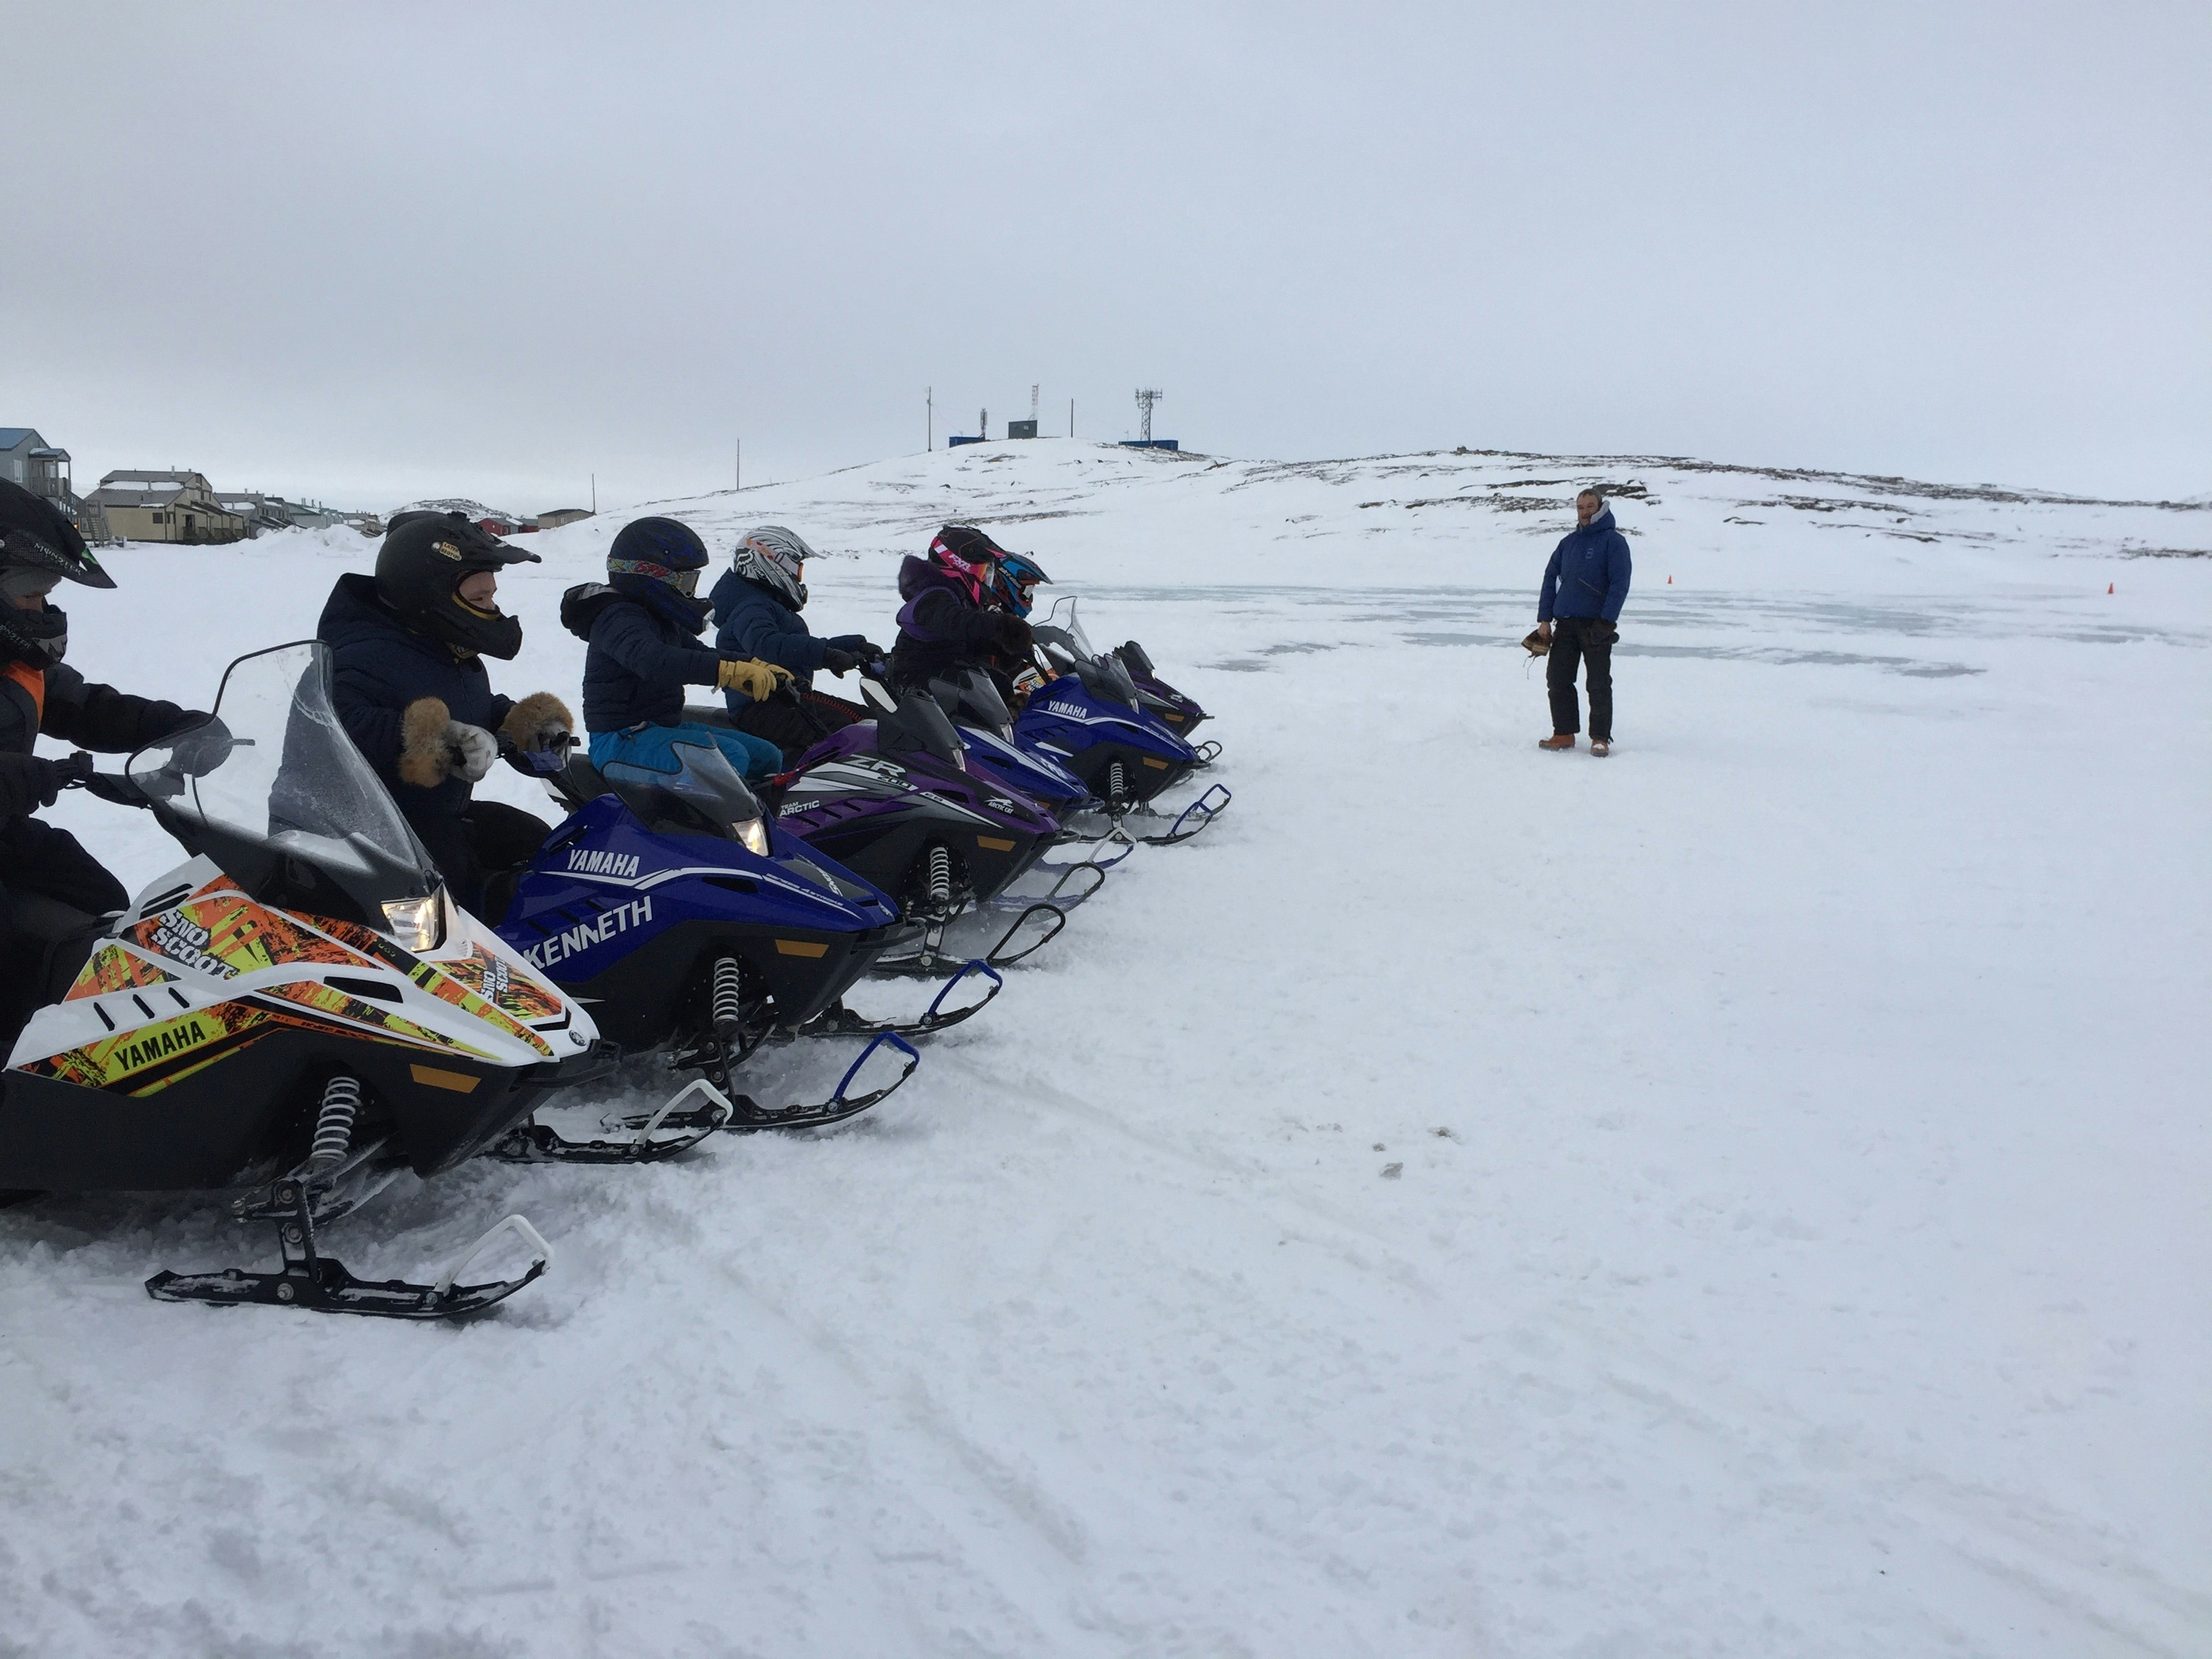 Children on miniature snowmobiles are lined up in a row, ready to begin a race during the Toonik Tyme Festival in Iqaluit.